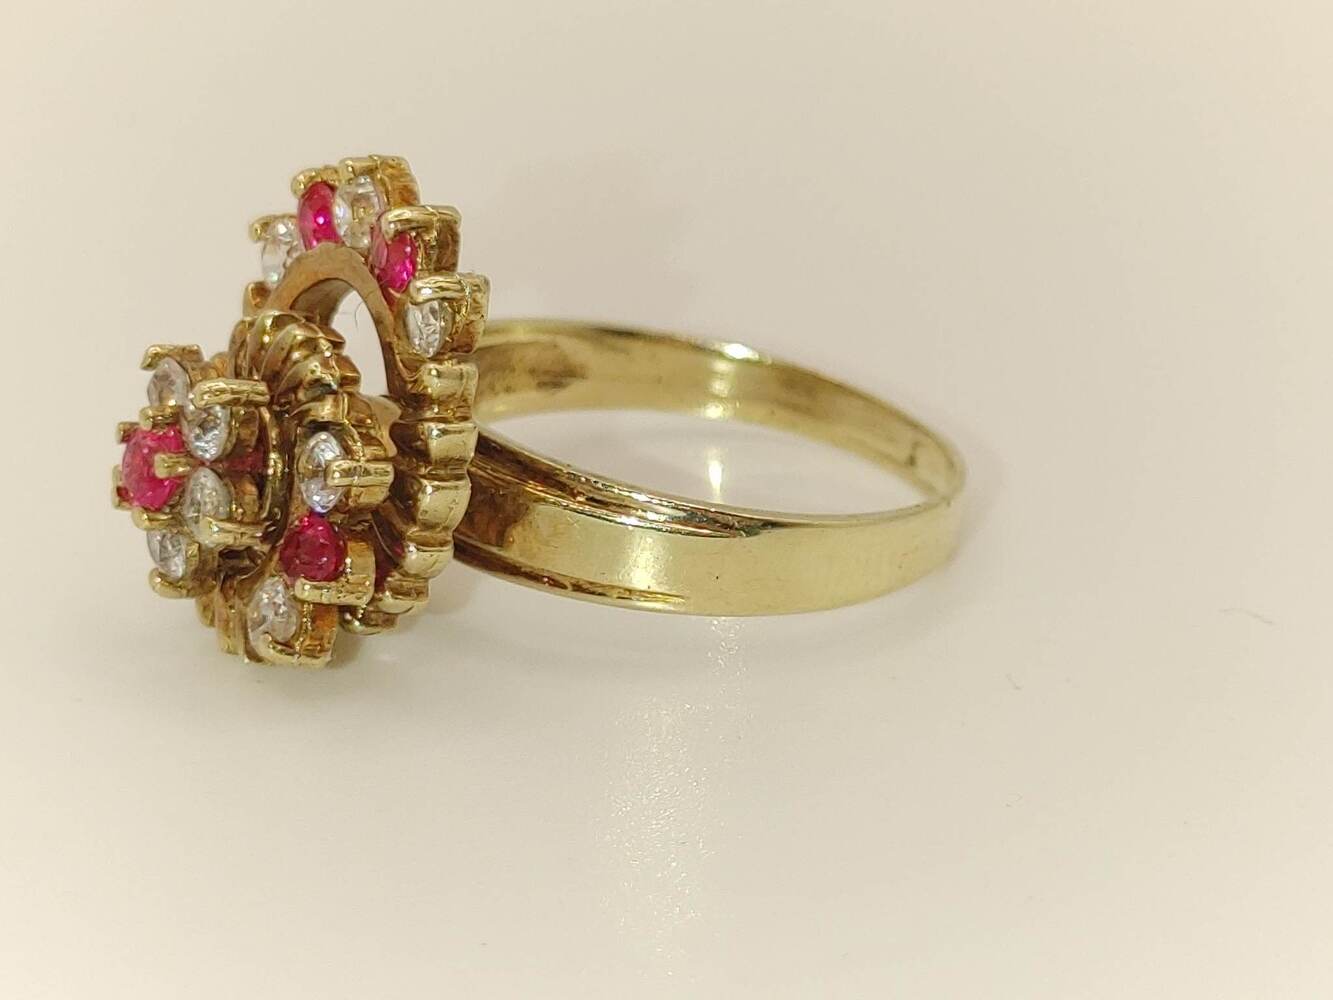 Retro Gold Spinning Ring, 10 Karat Yellow Gold with Red and Clear Stones